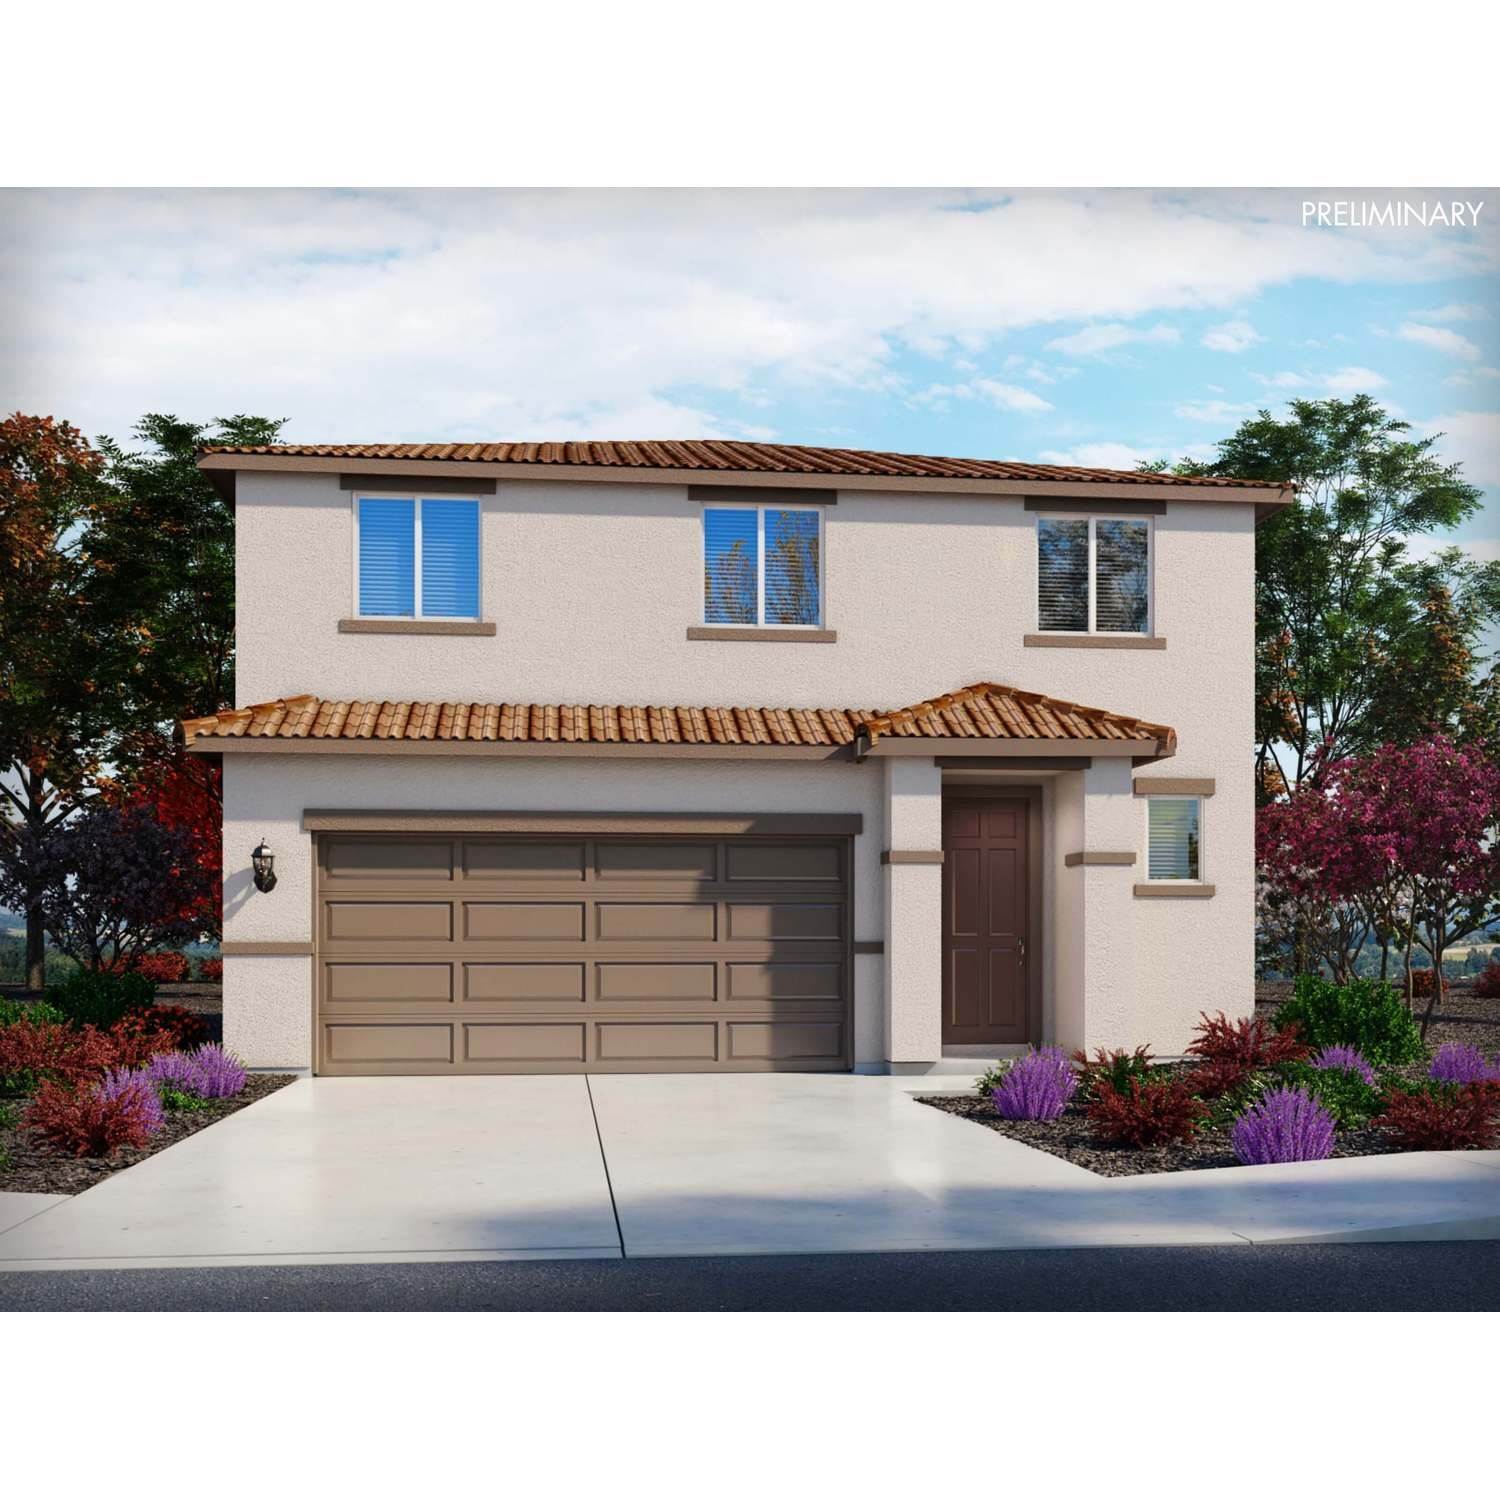 Single Family for Sale at Tierra Del Sol 31940 Gimbal Way, Winchester, CA 92596